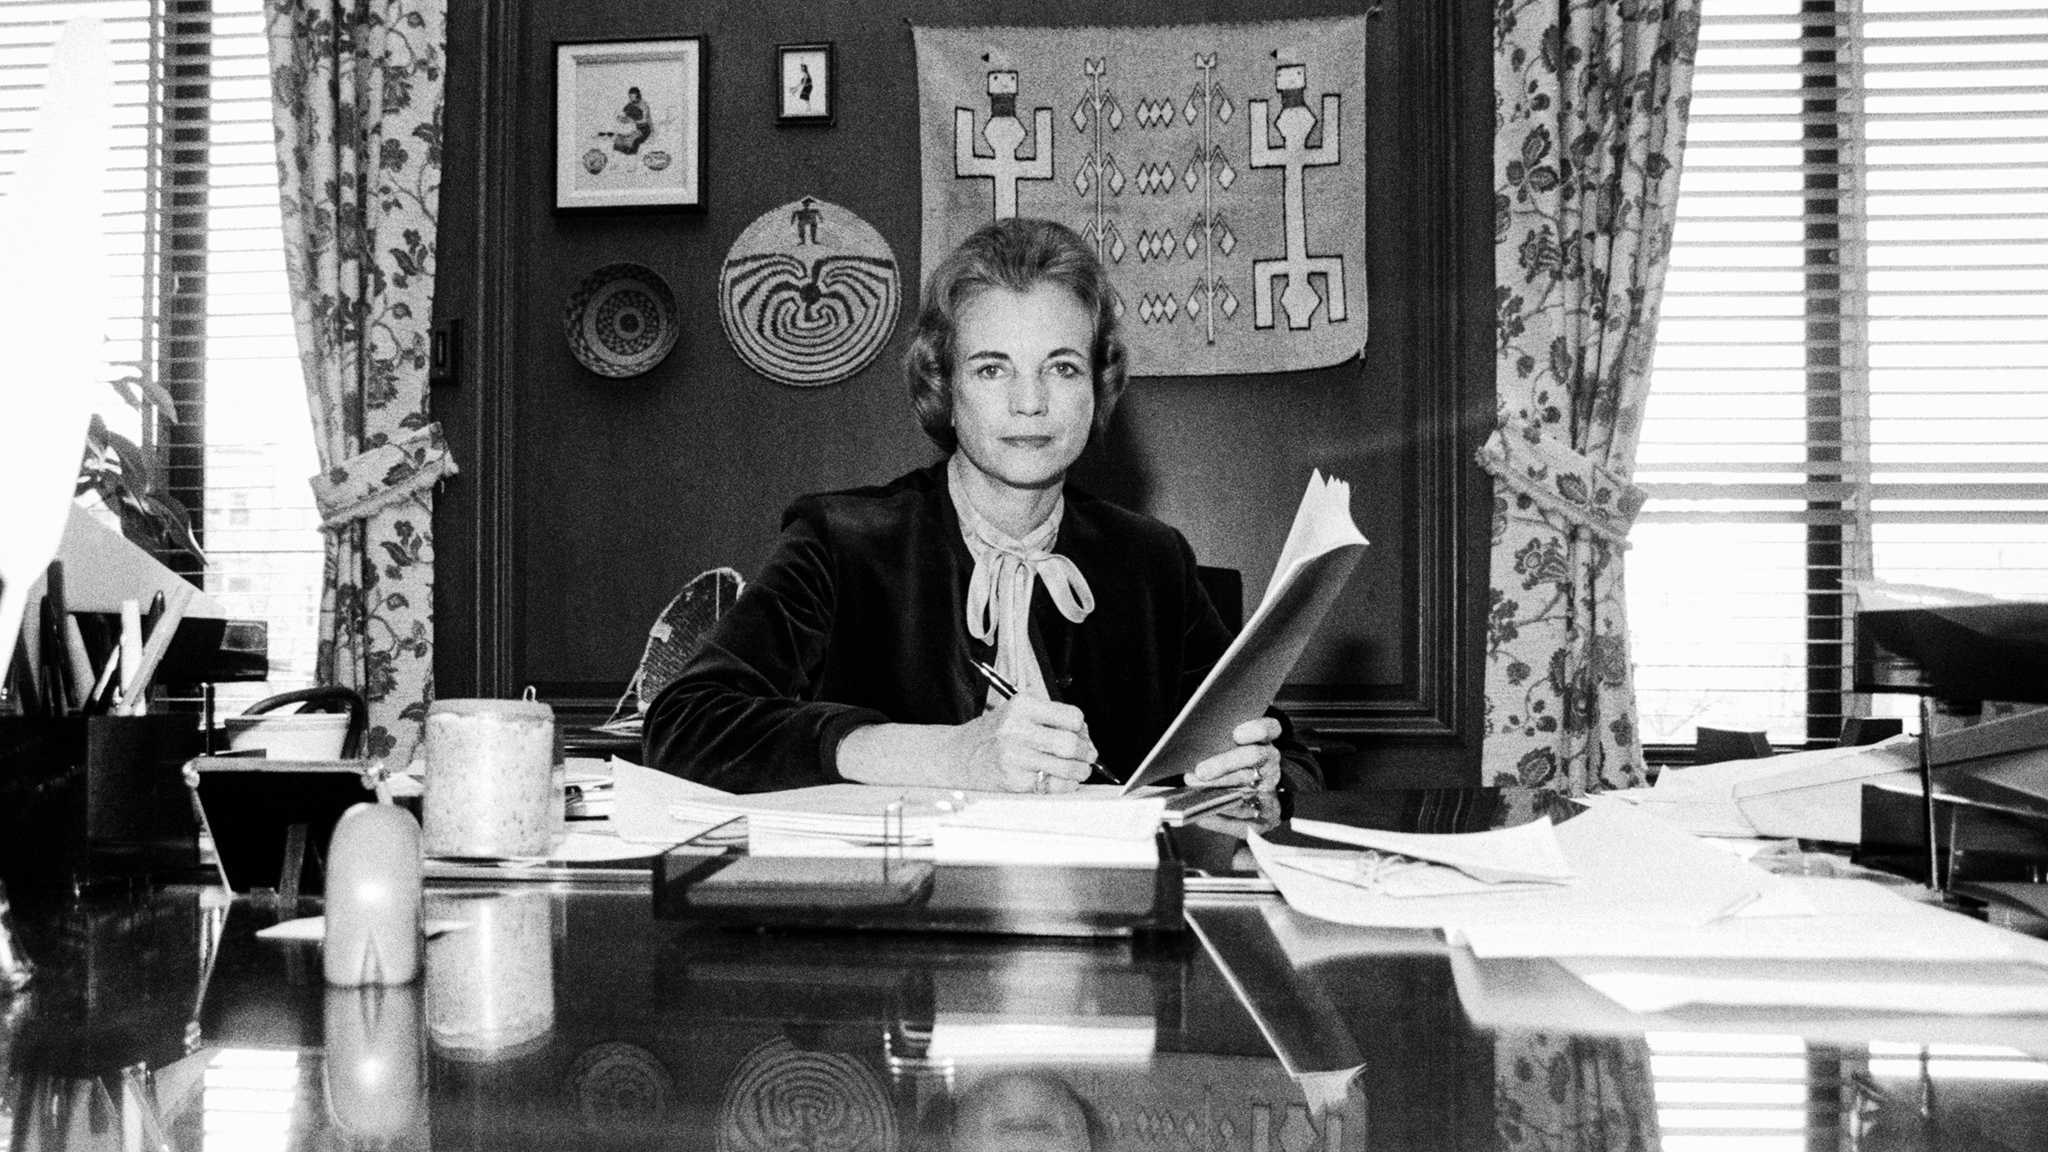 September 21, 1981: Sandra Day O’Connor Was Confirmed as the First Female Supreme Court Justice